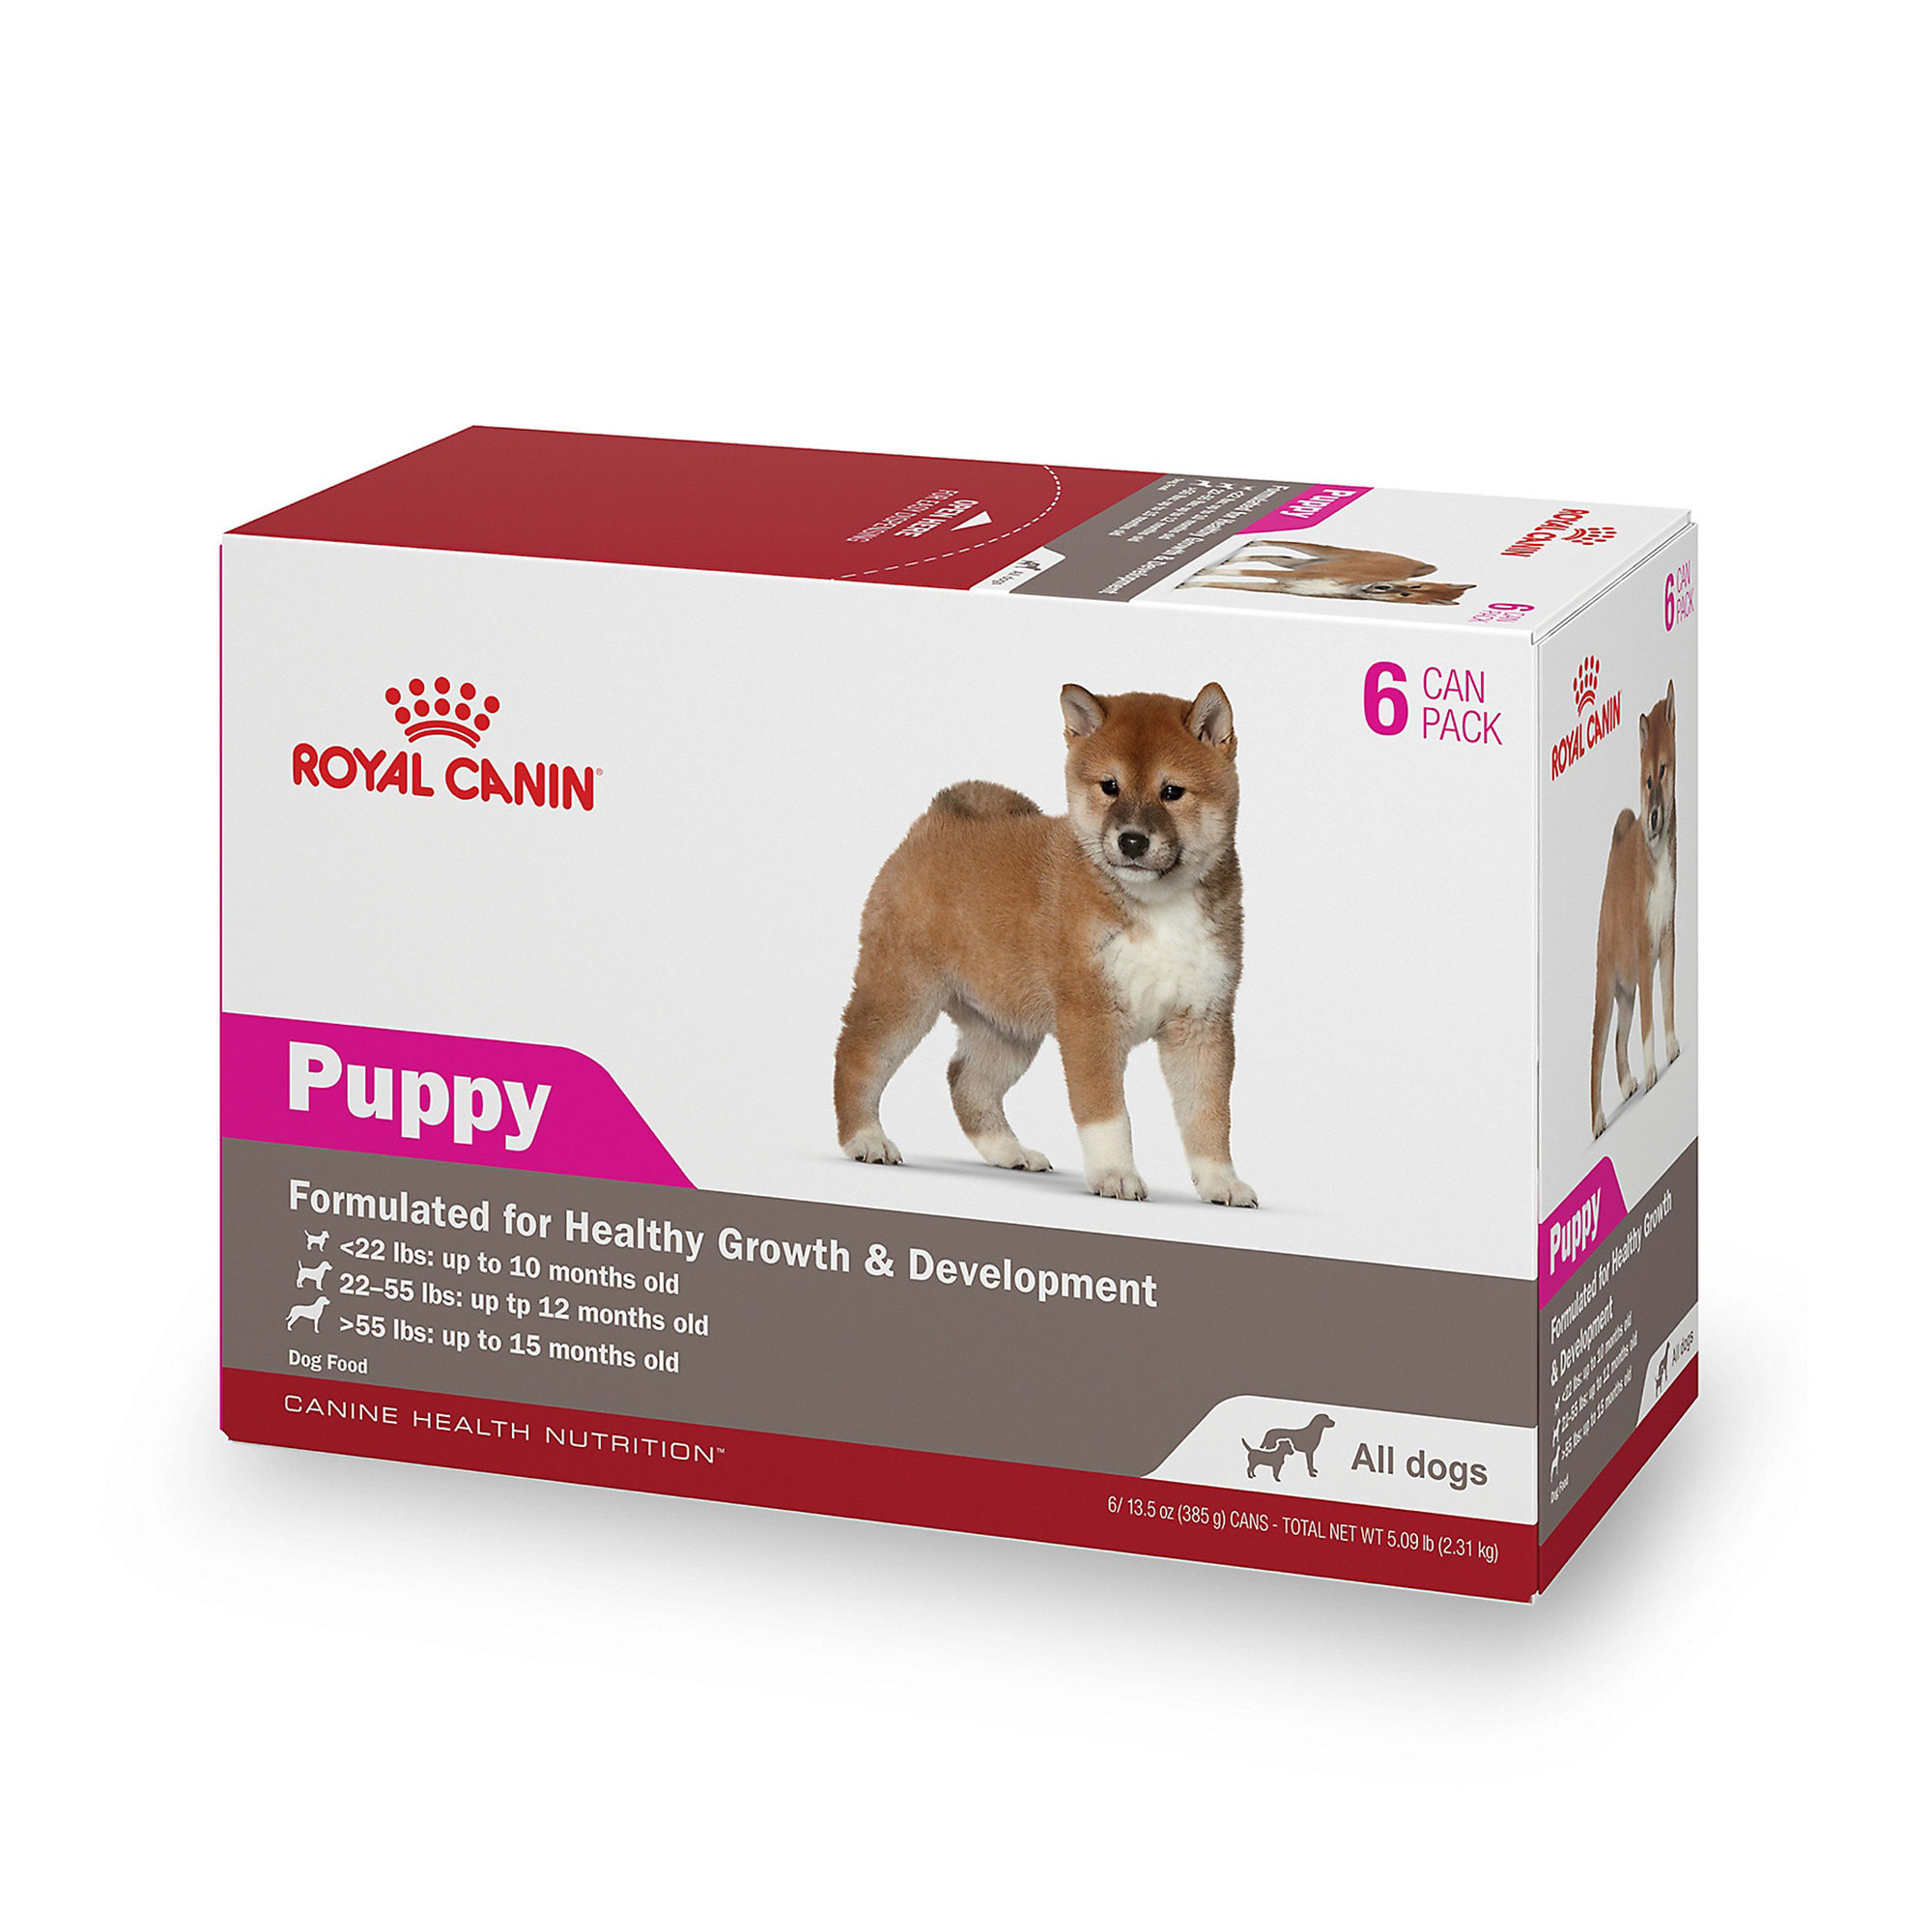 royal canin small pack